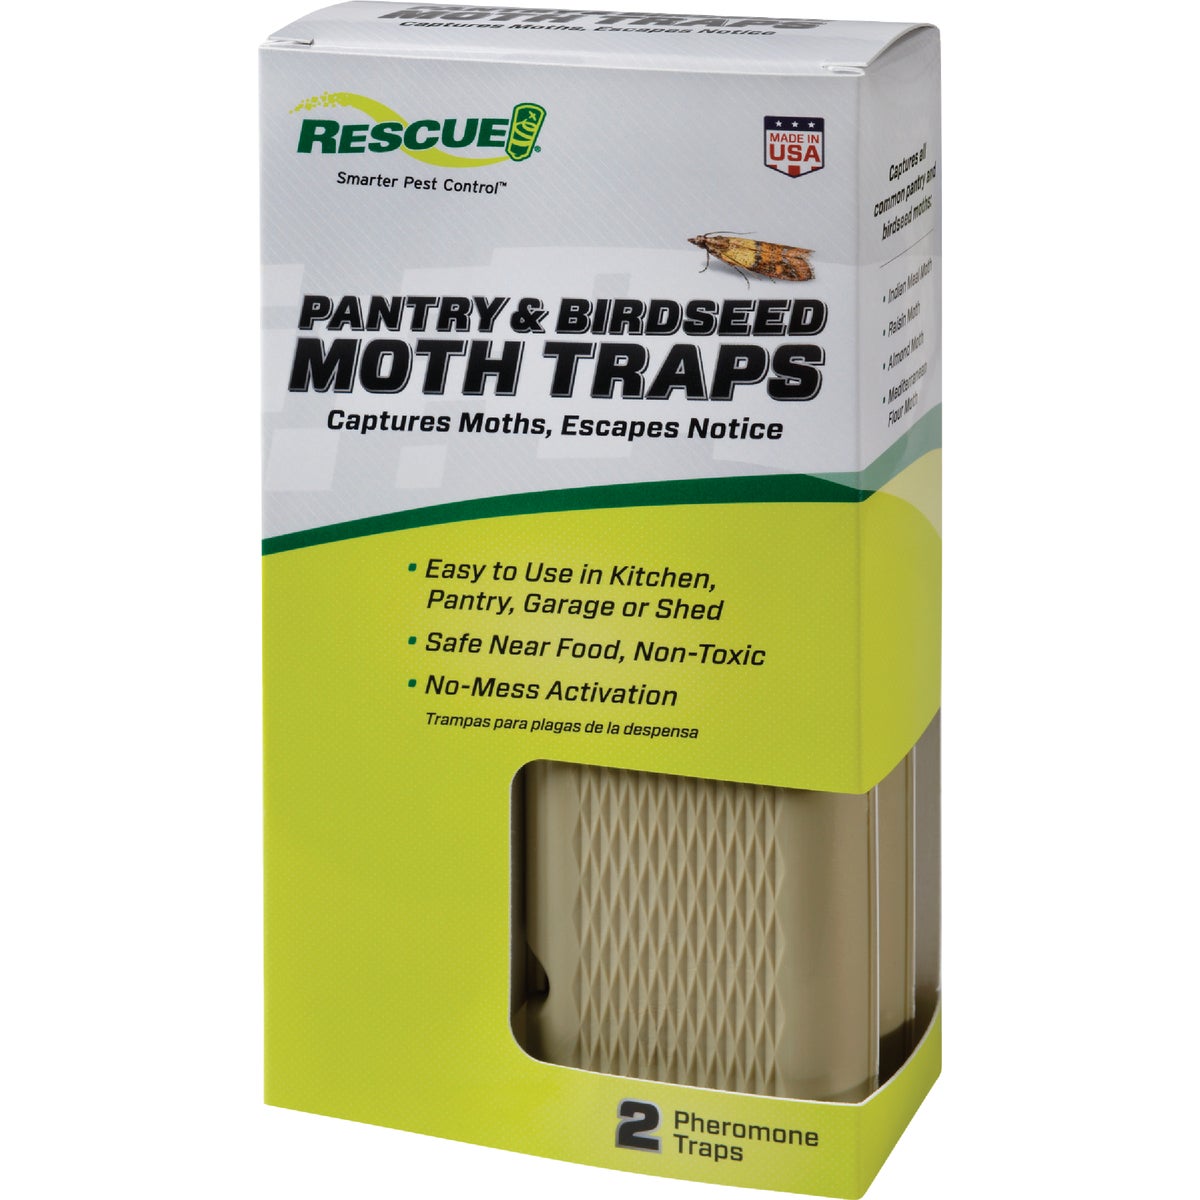 Item 705404, Pantry and birdseed moth trap.